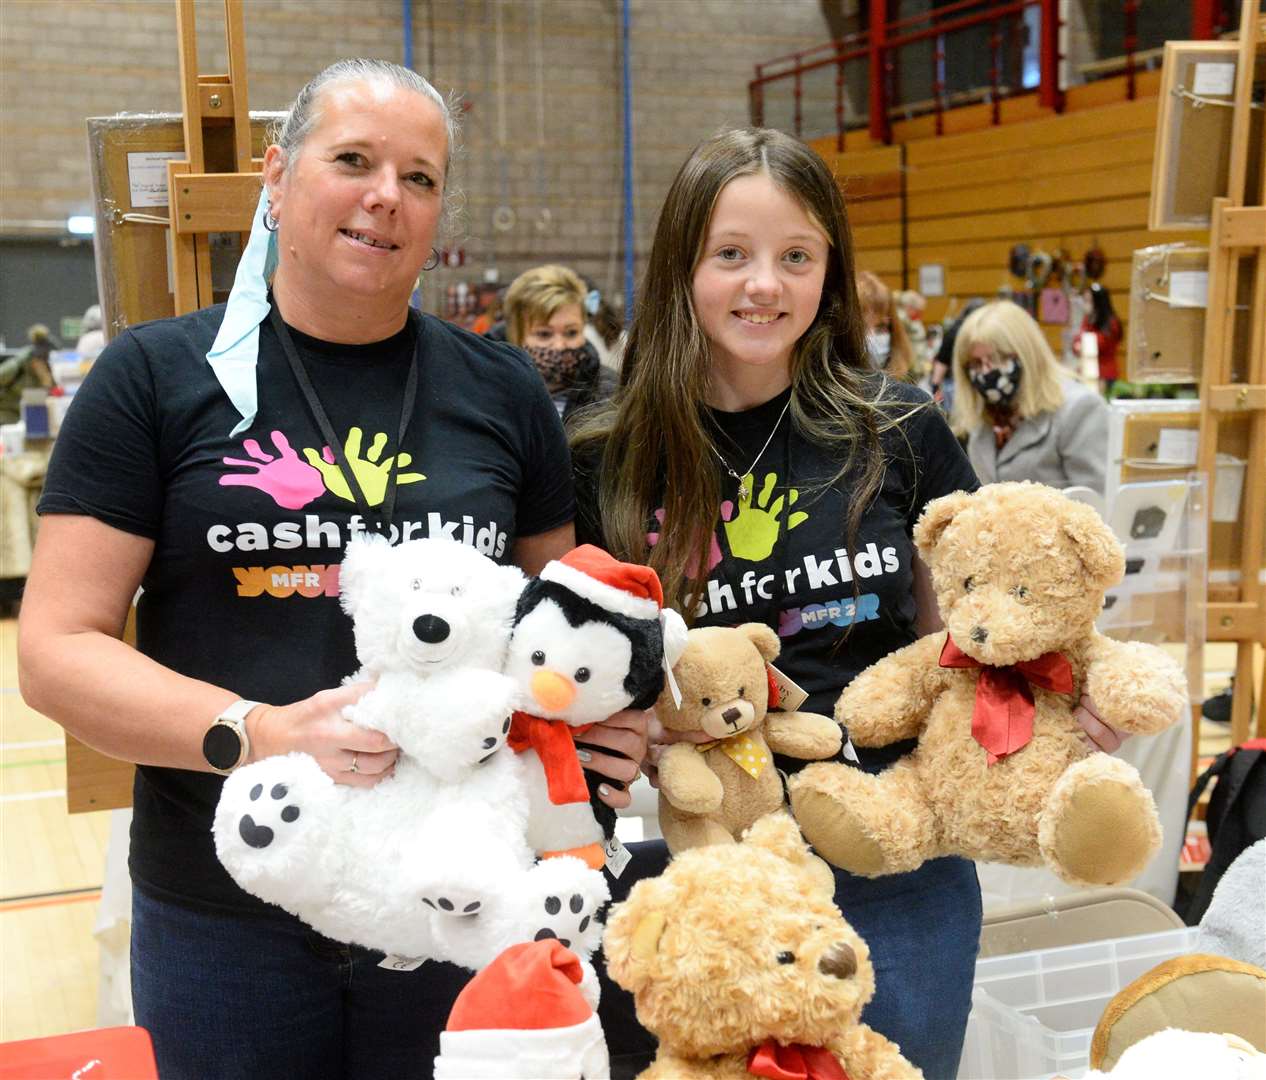 Giant Christmas Fayre at Inverness Leisure Centre. Cash for kids tombola stall volunteers Fiona and Eilidh Will.Picture Gary Anthony.